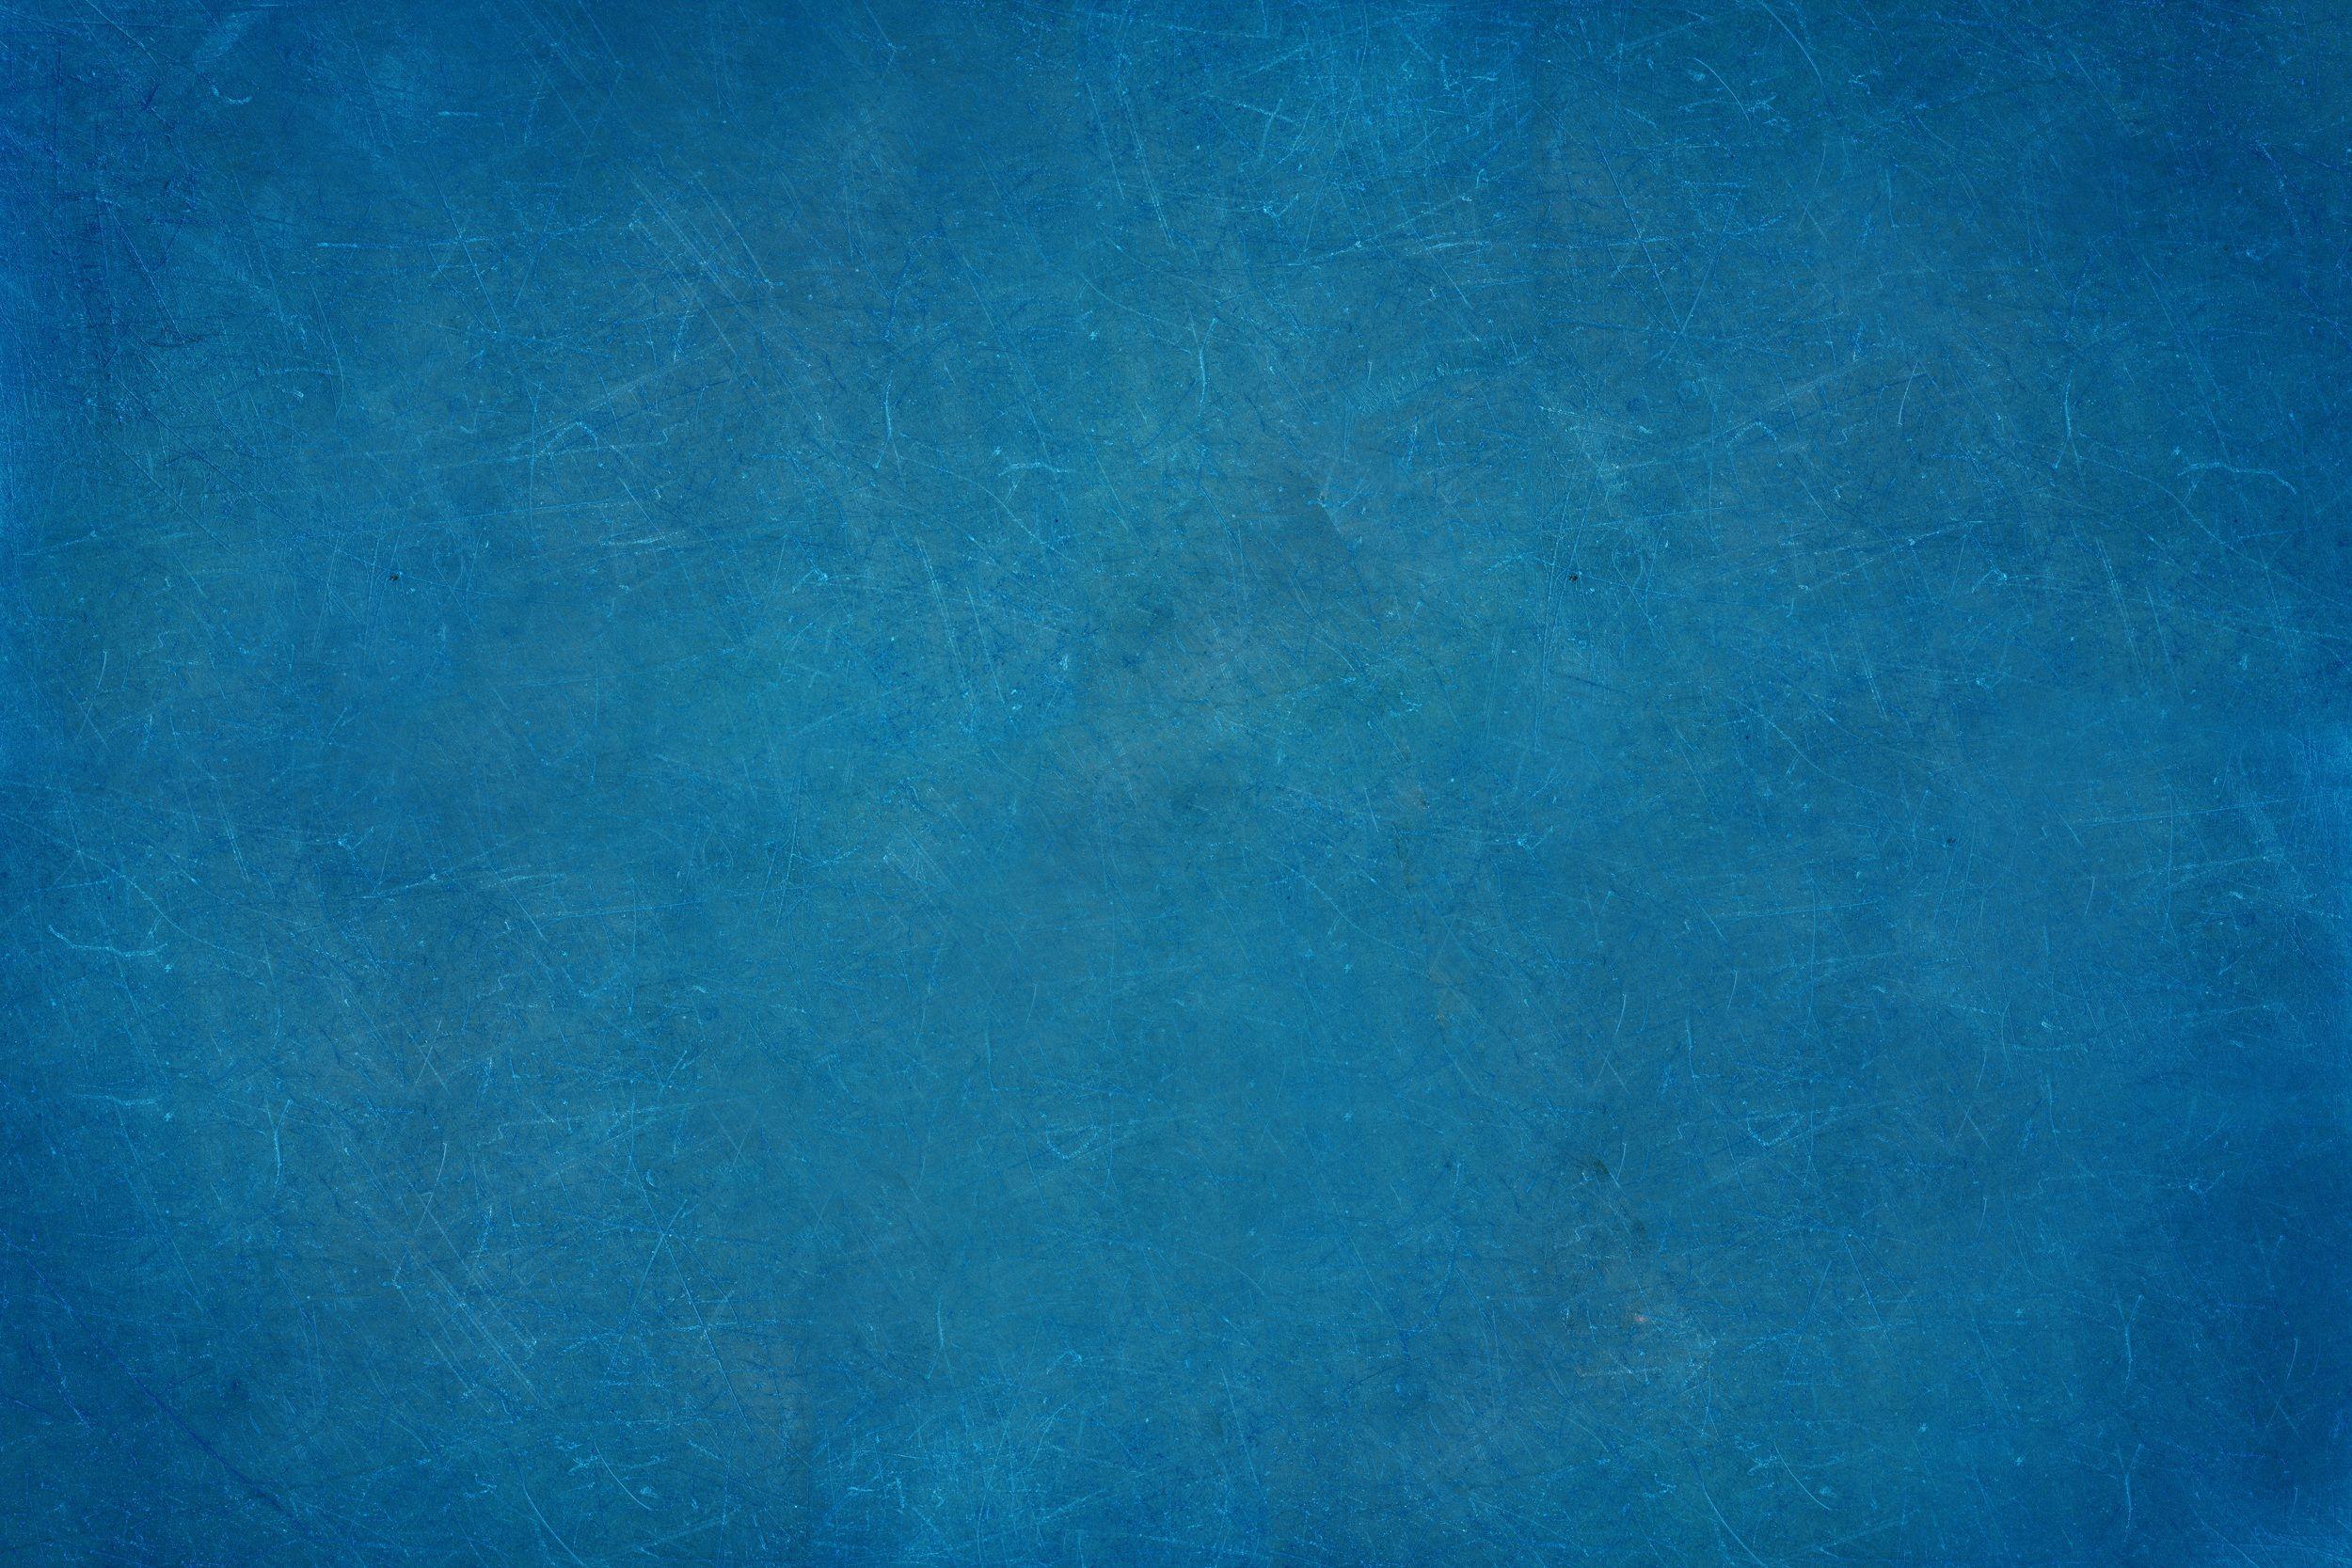 Textured Blue Wallpapers - Top Free Textured Blue Backgrounds ...